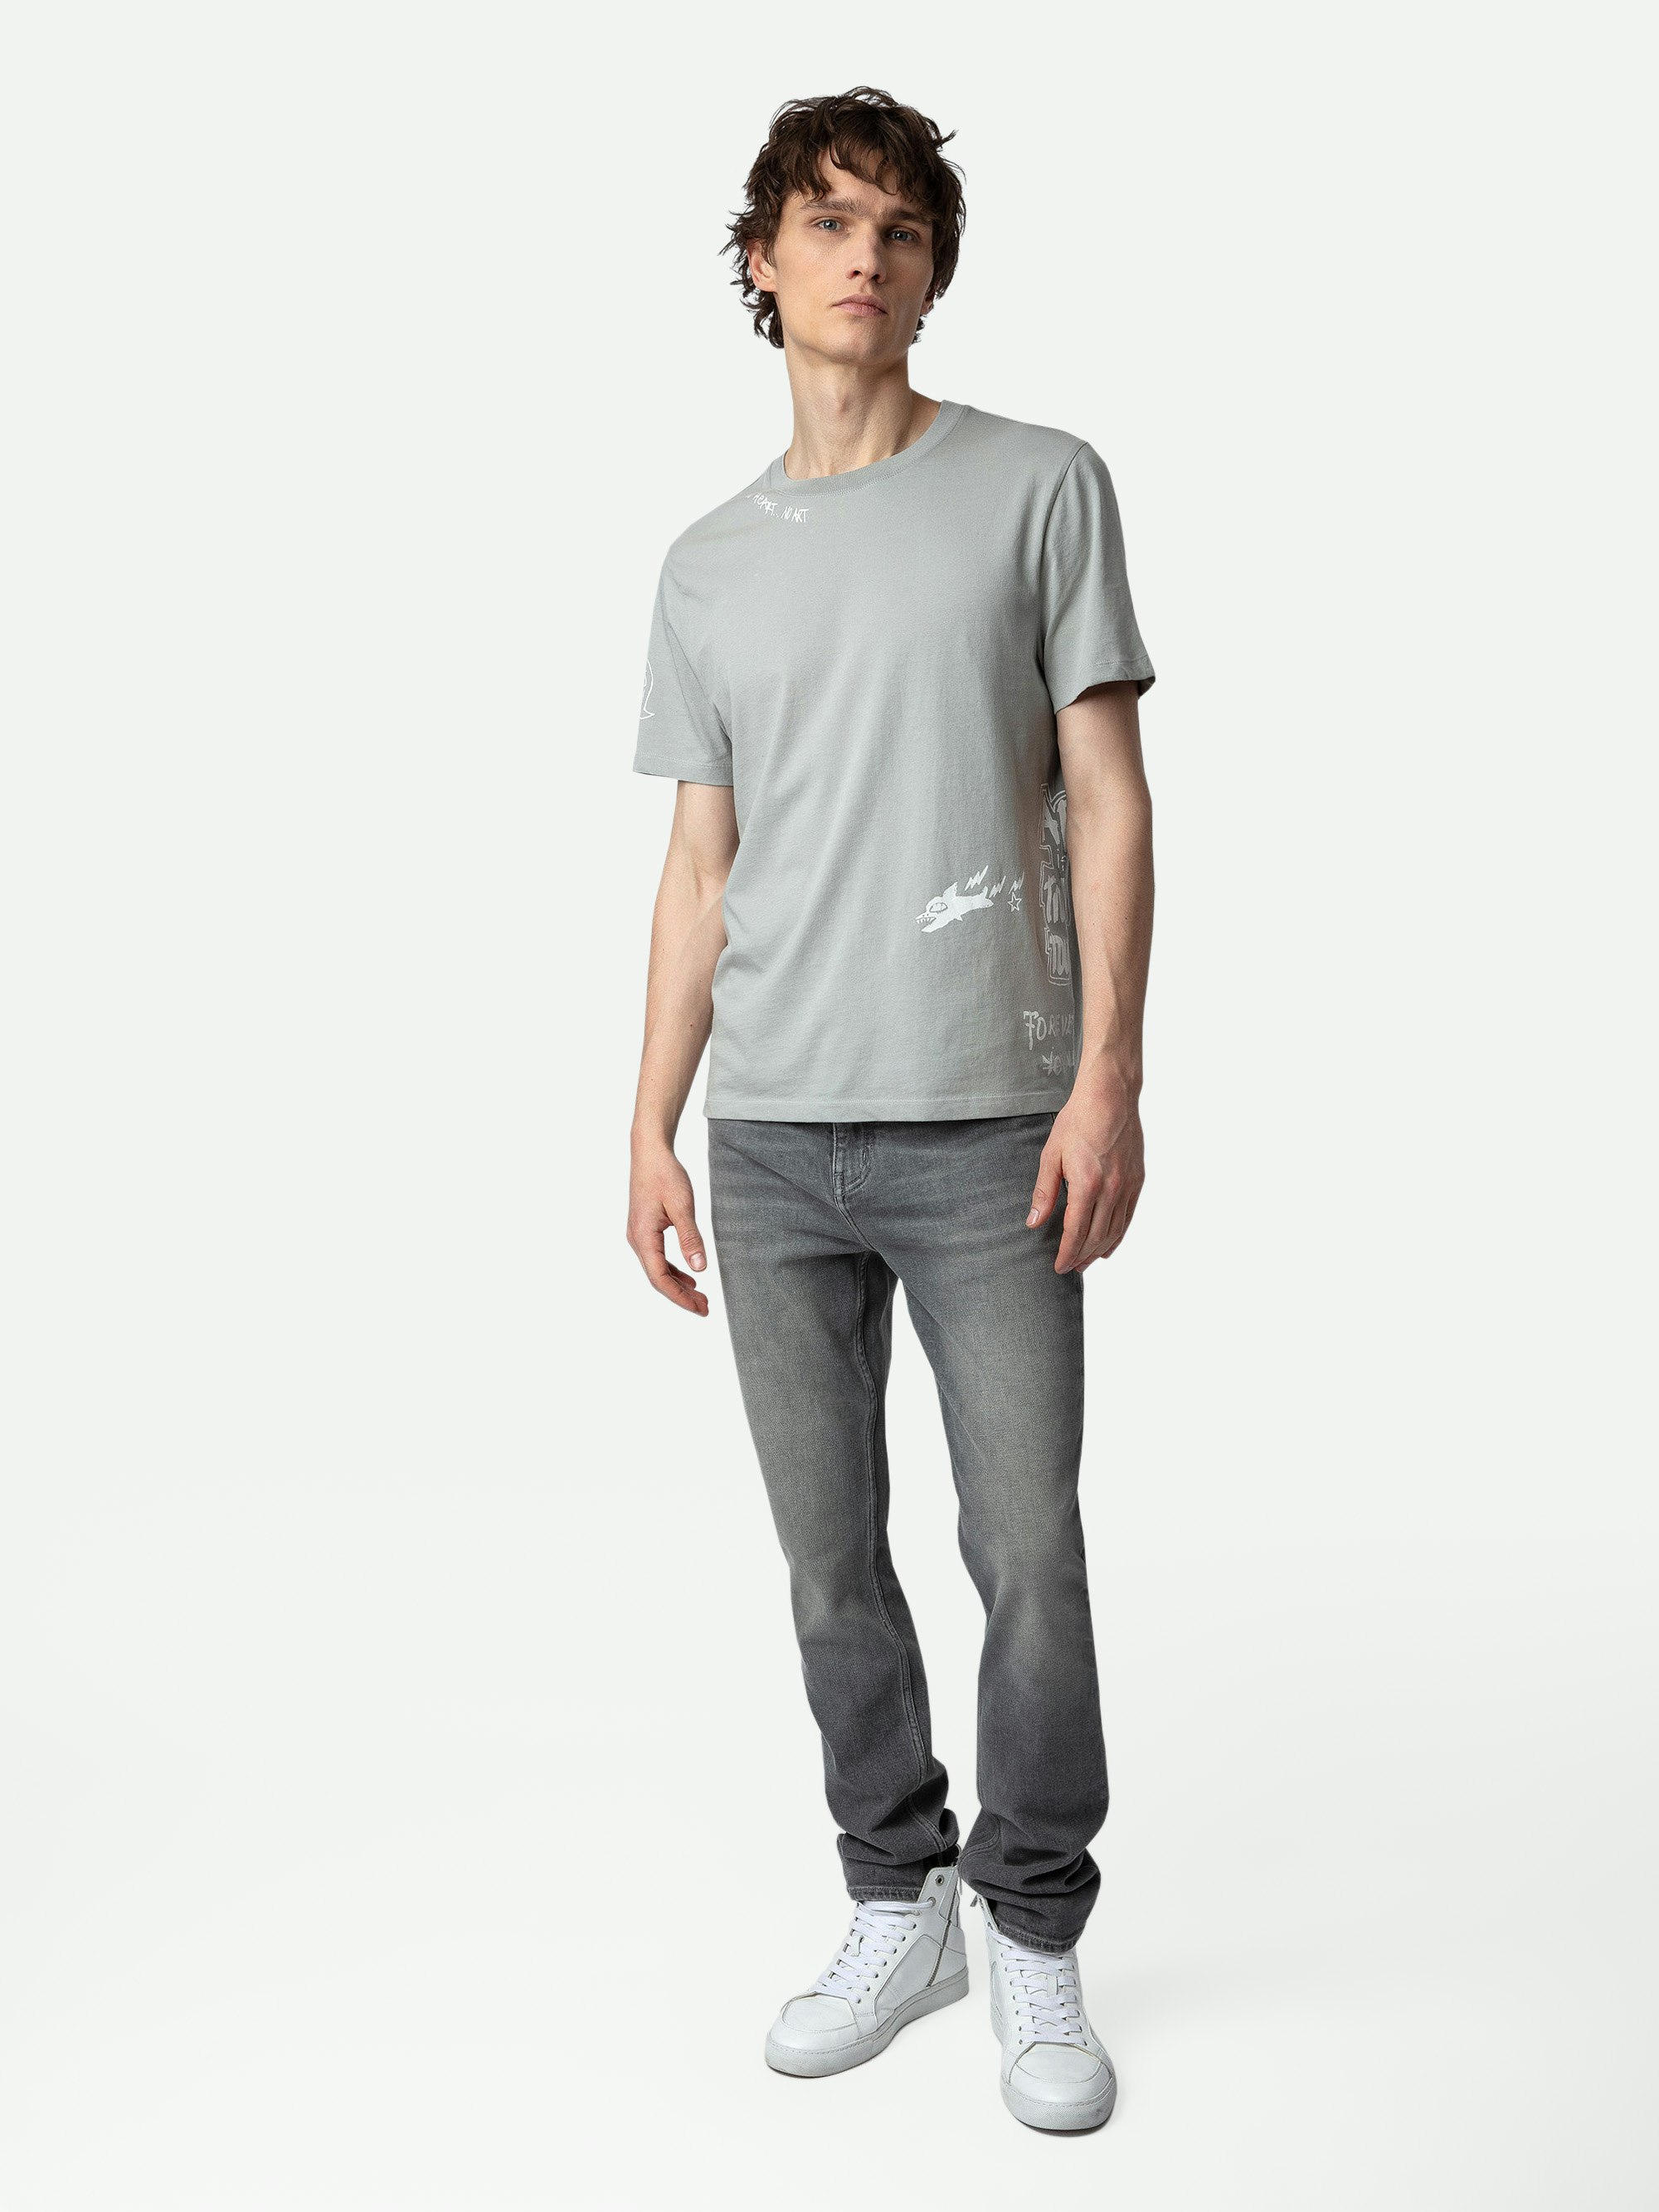 Ted Tag T-shirt - Grey organic cotton T-shirt with customised details designed by Humberto Cruz.